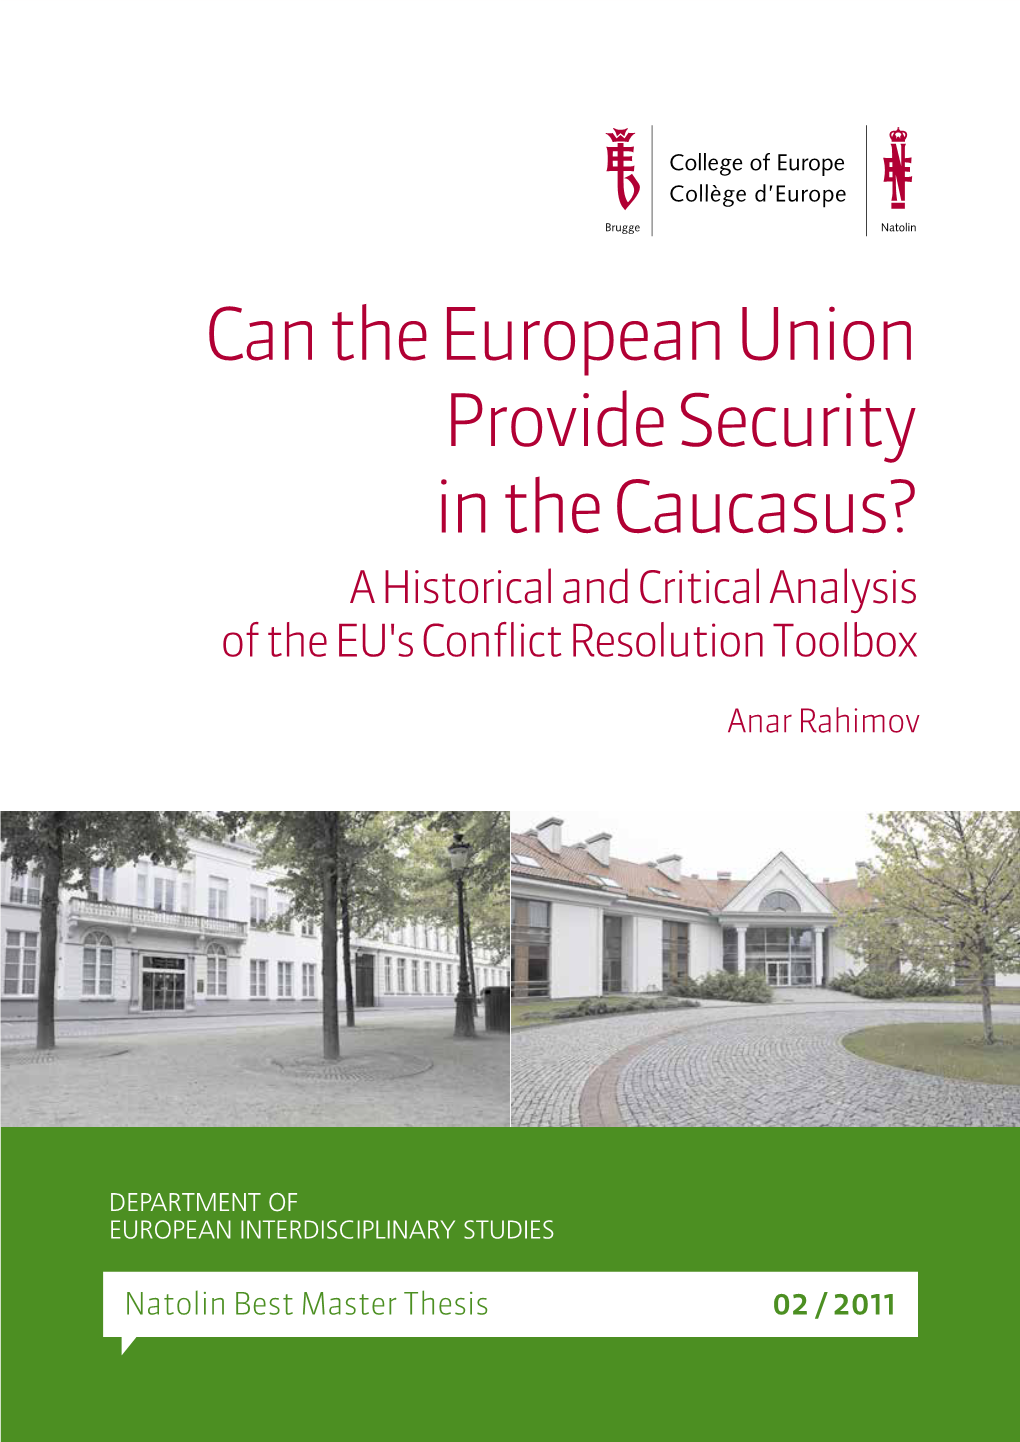 Can the European Union Provide Security in the Caucasus? a Historical and Critical Analysis of the EU's Conflict Resolution Toolbox